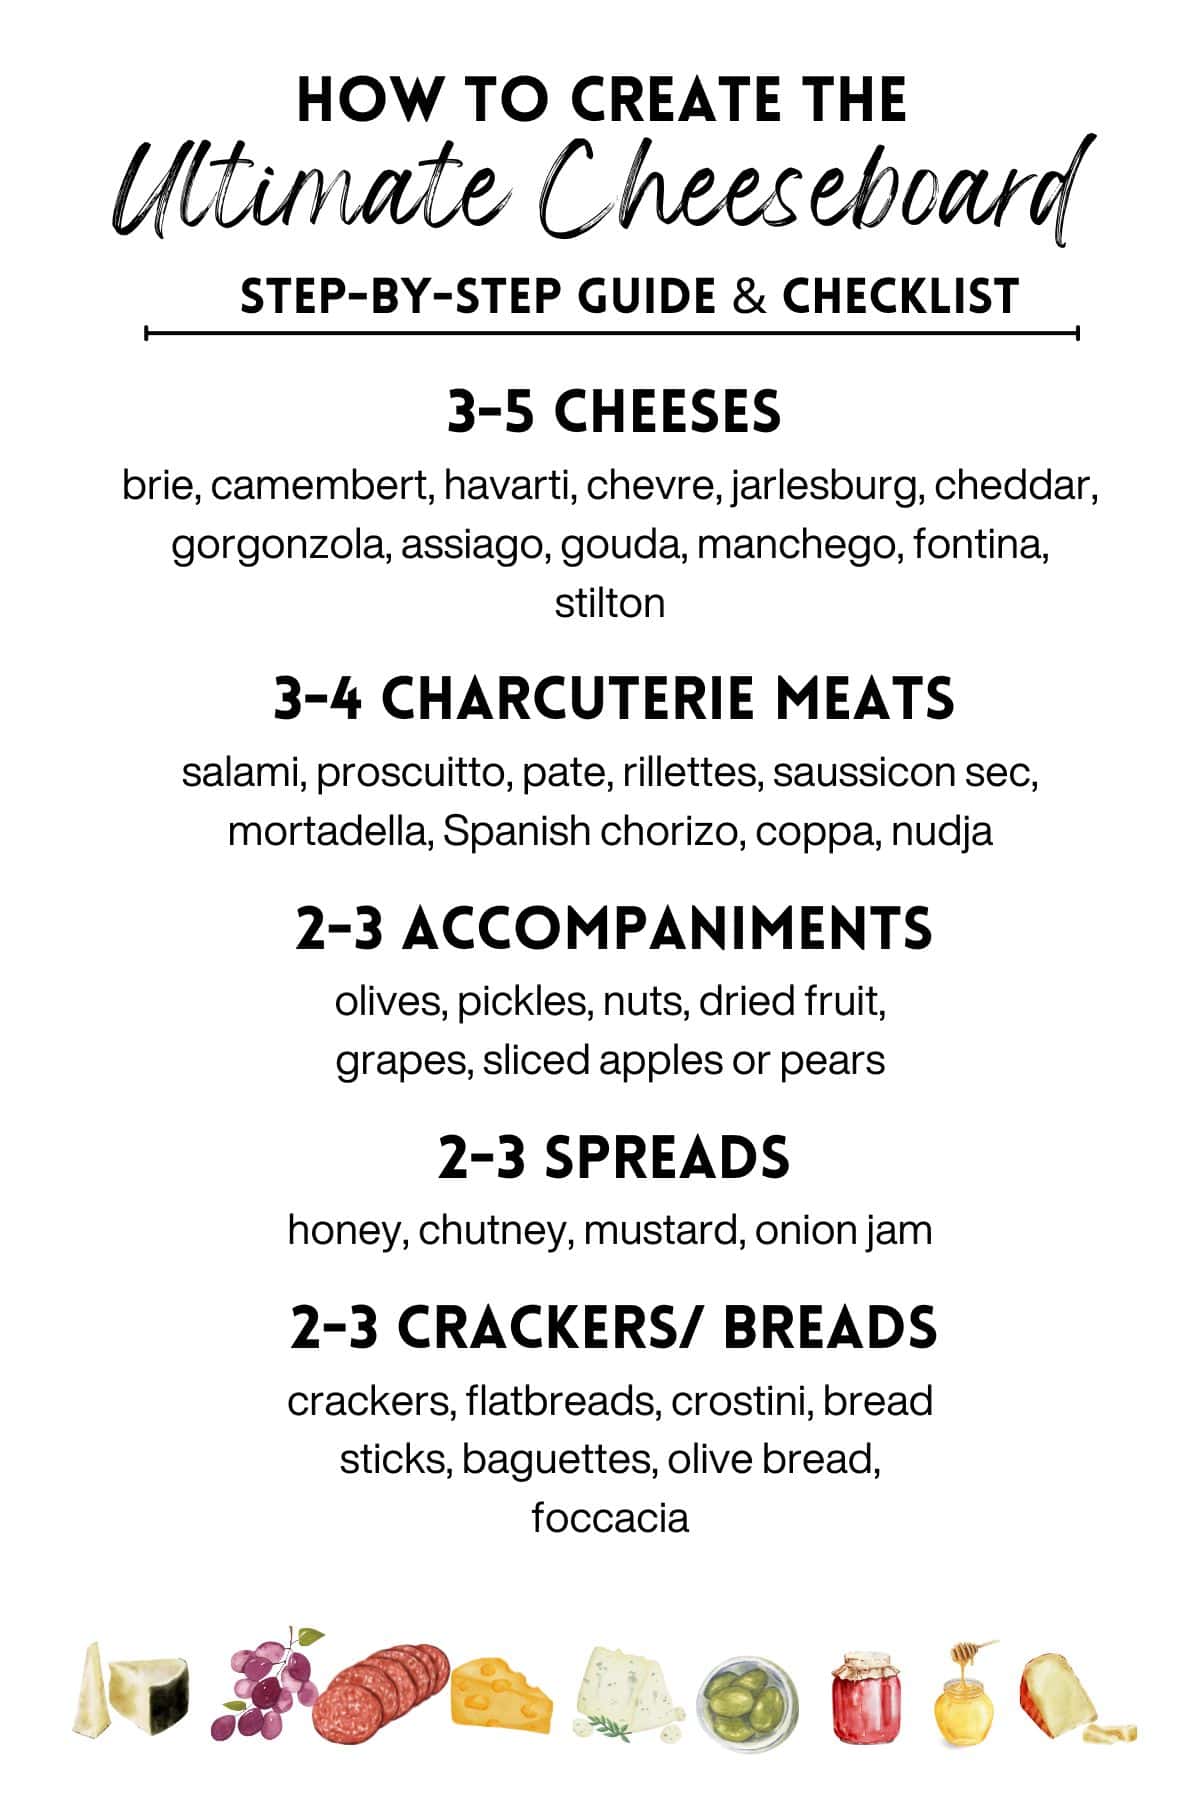 Printable for making the perfect cheeseboard.